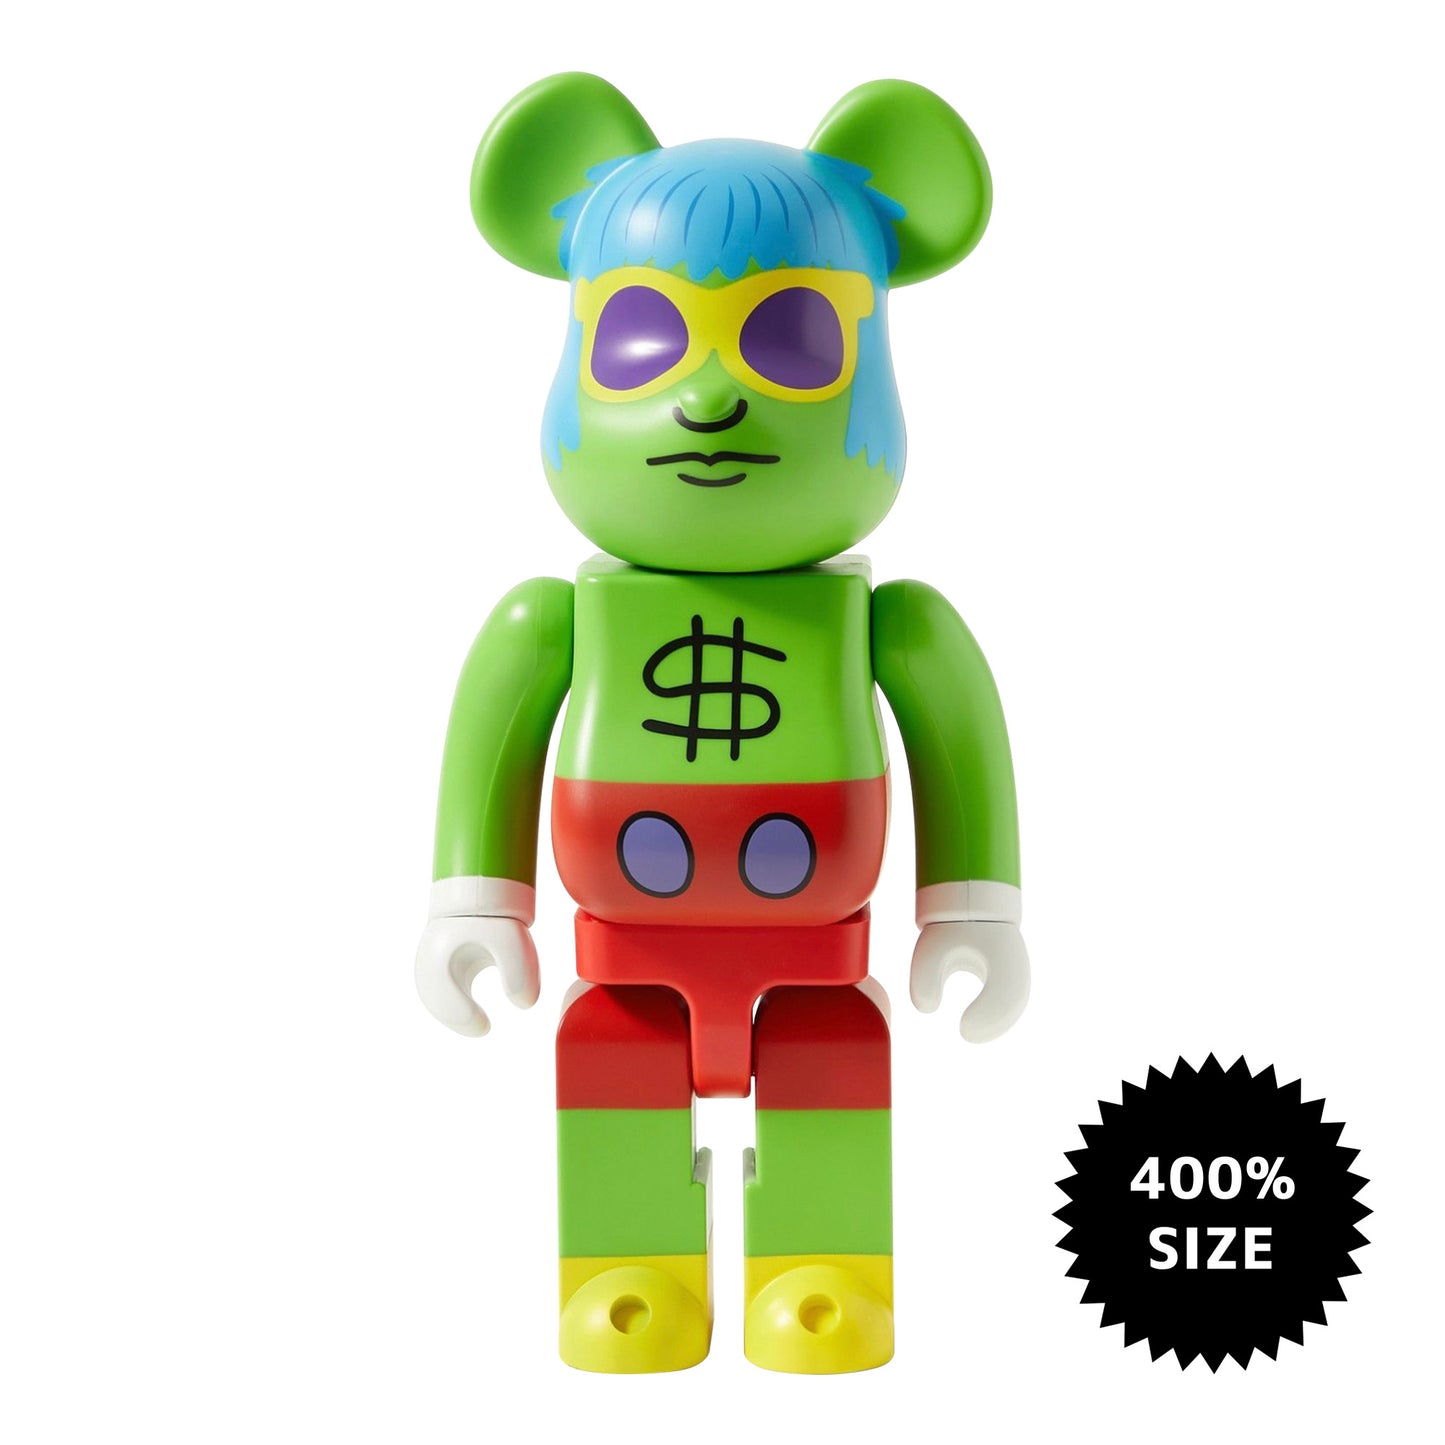 MEDICOM TOY: BE@RBRICK - Keith Haring Andy Mouse 400%